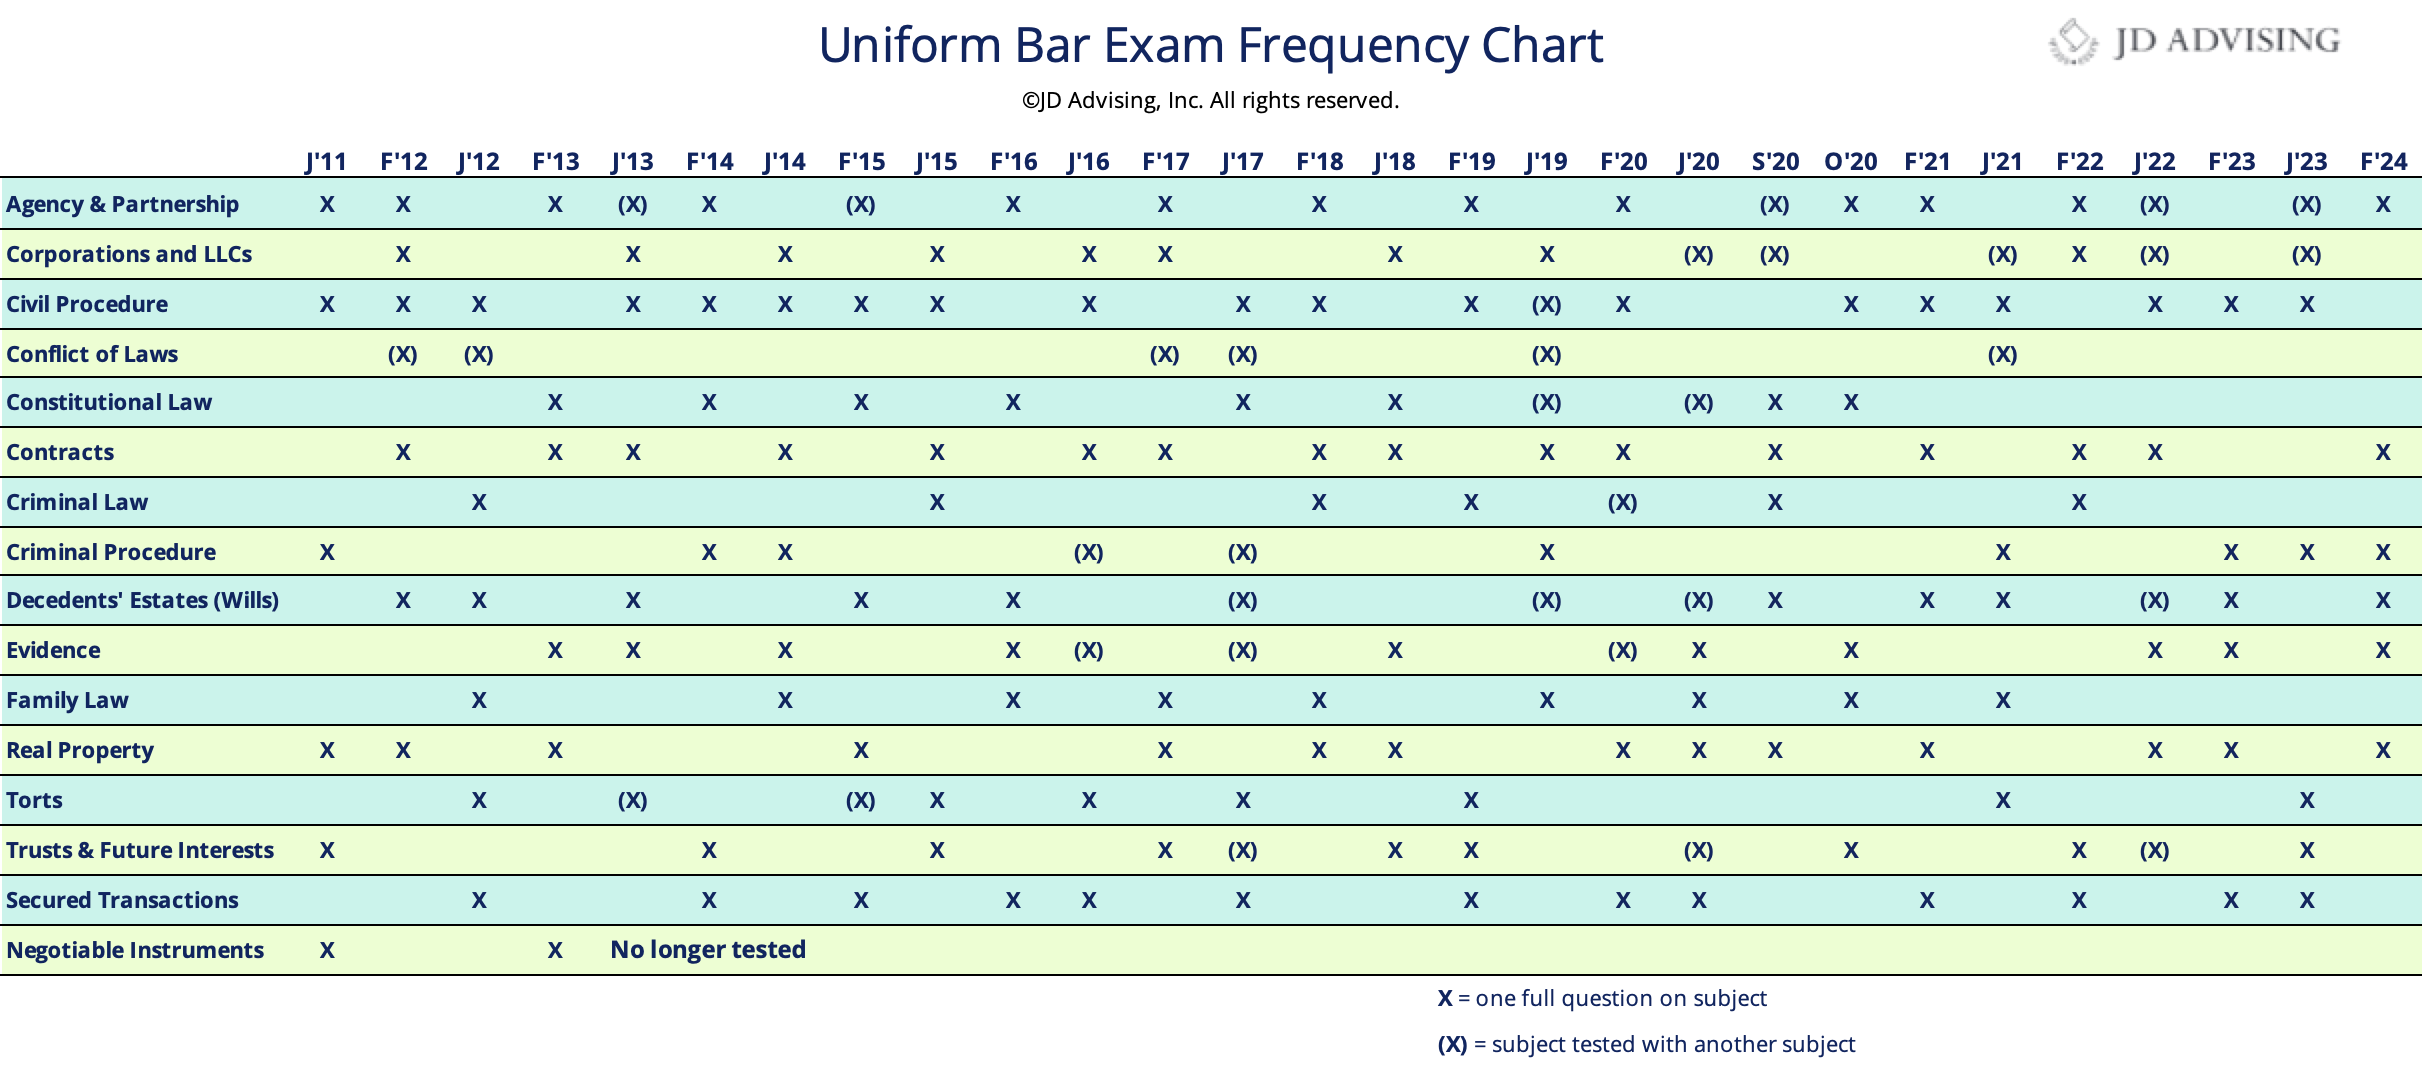 Which Subjects are Tested on the Uniform Bar Exam?